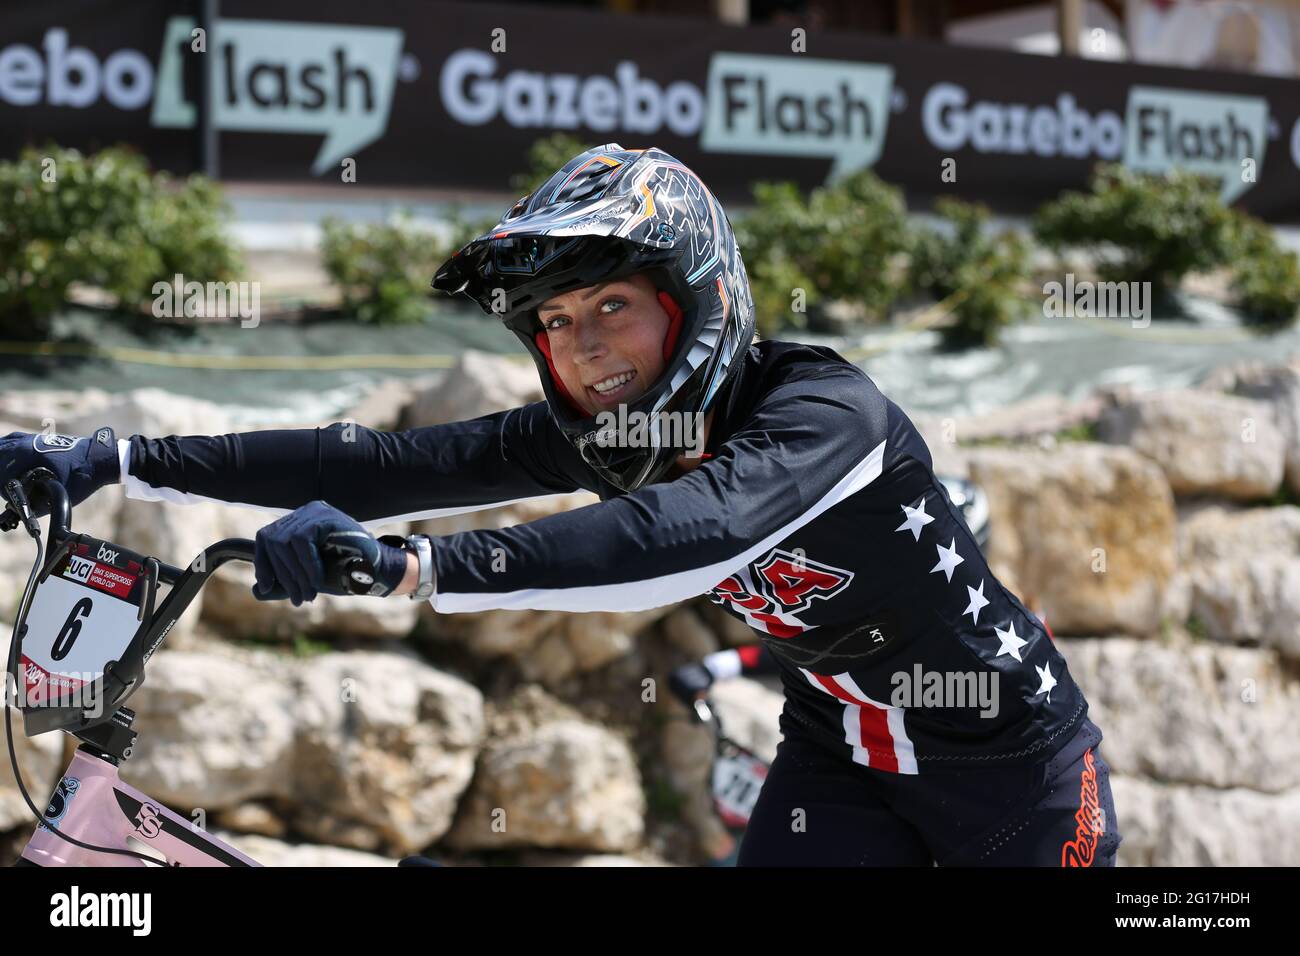 Felicia STANCIL of the United States competes in the UCI BMX Supercross  World Cup Round 1 at the BMX Olympic Arena on May 8th 2021 in Verona, Italy  Stock Photo - Alamy